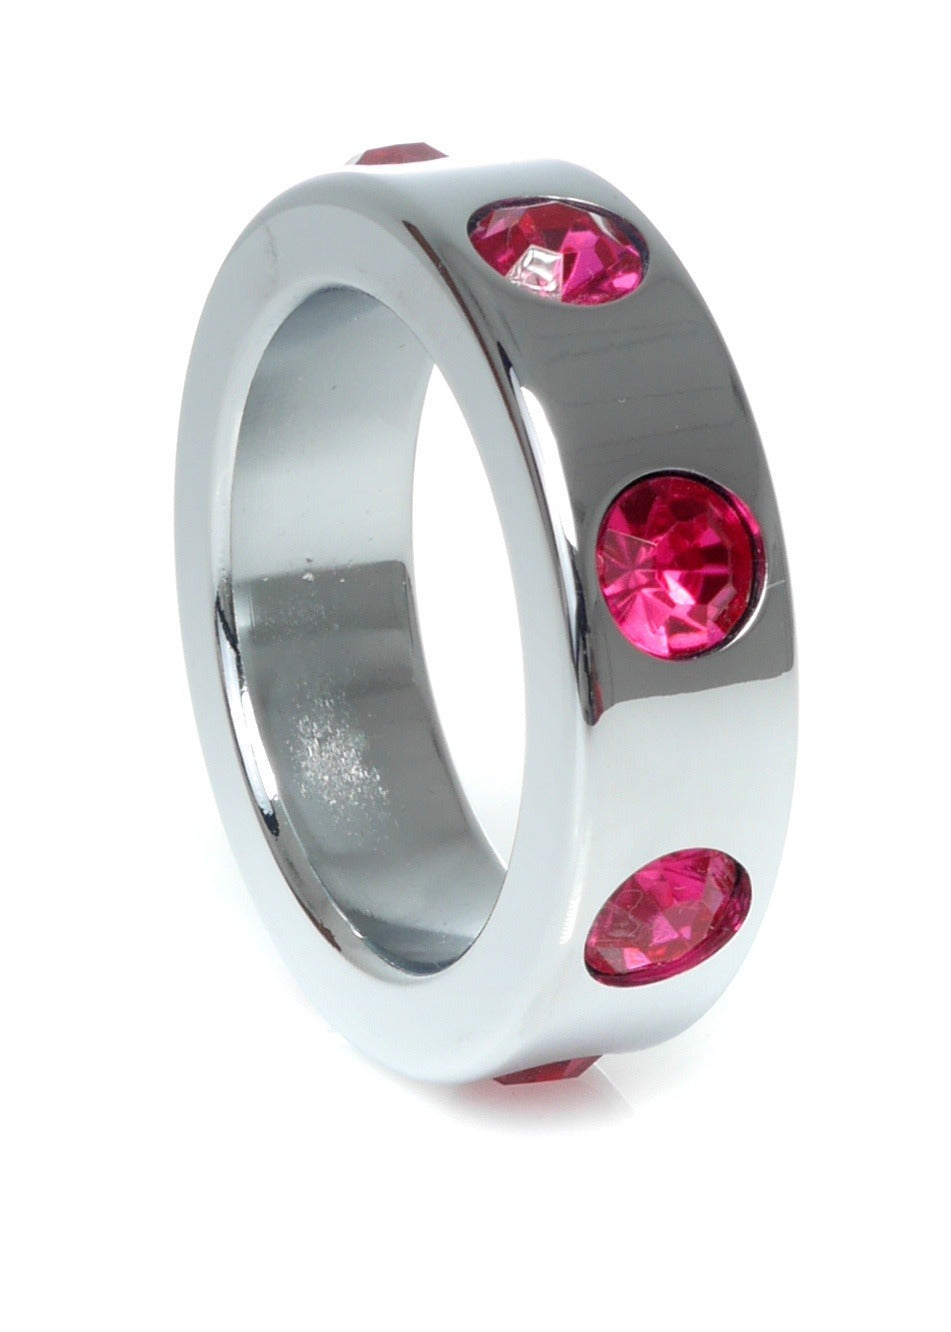 Bossoftoys - 64-00119 - Stainless steel - Metal Cockring - with Pink Diamond stones - Medium size - inner dia 3,5 CM - outer dia 4,5 CM